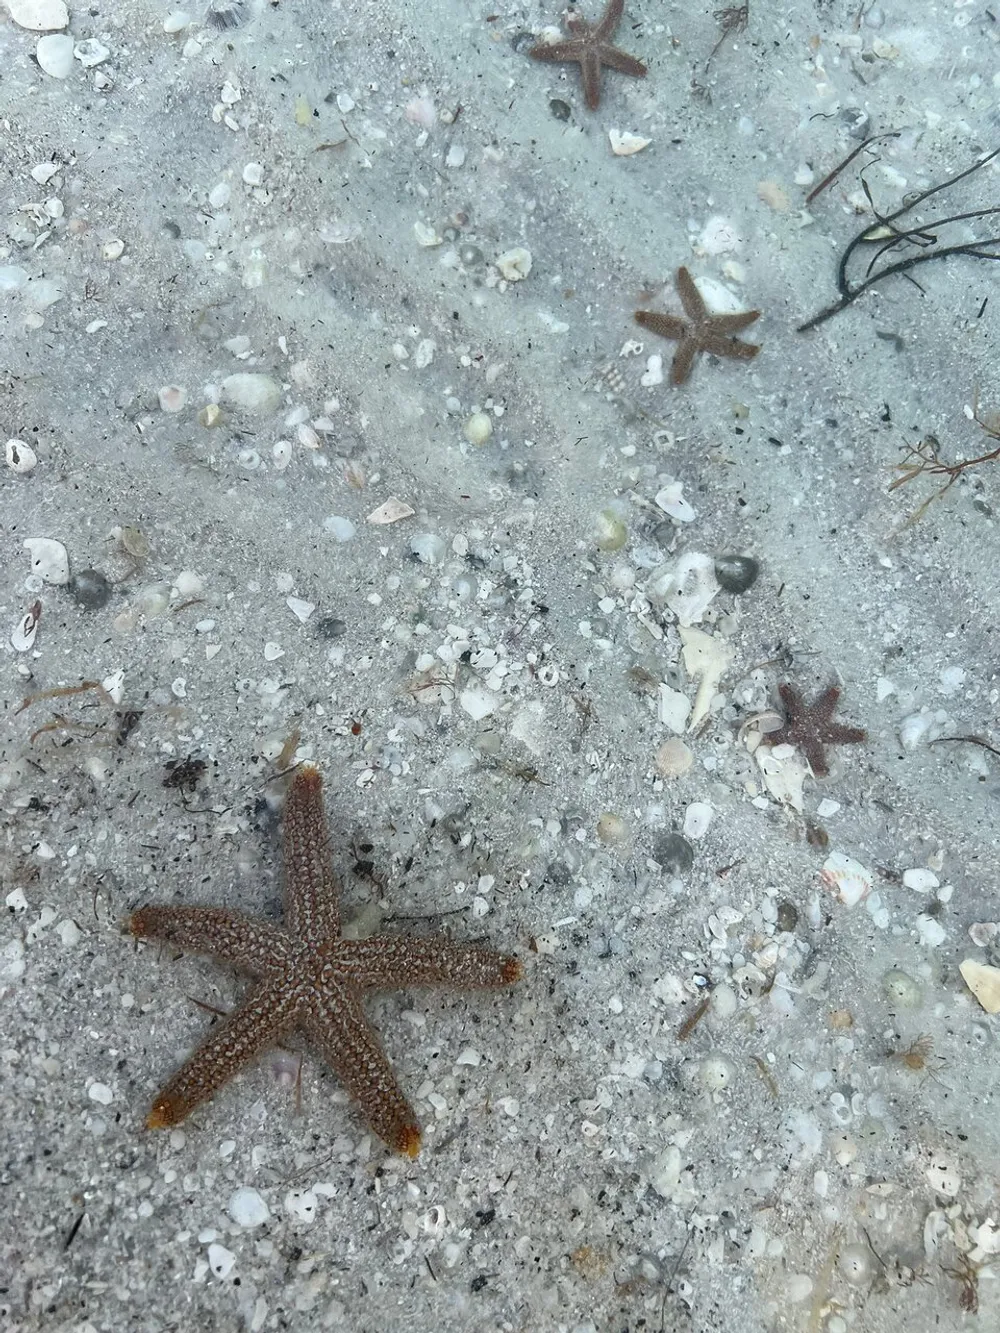 The image shows a close-up view of a sandy seabed with multiple starfish and scattered shells visible through clear shallow water